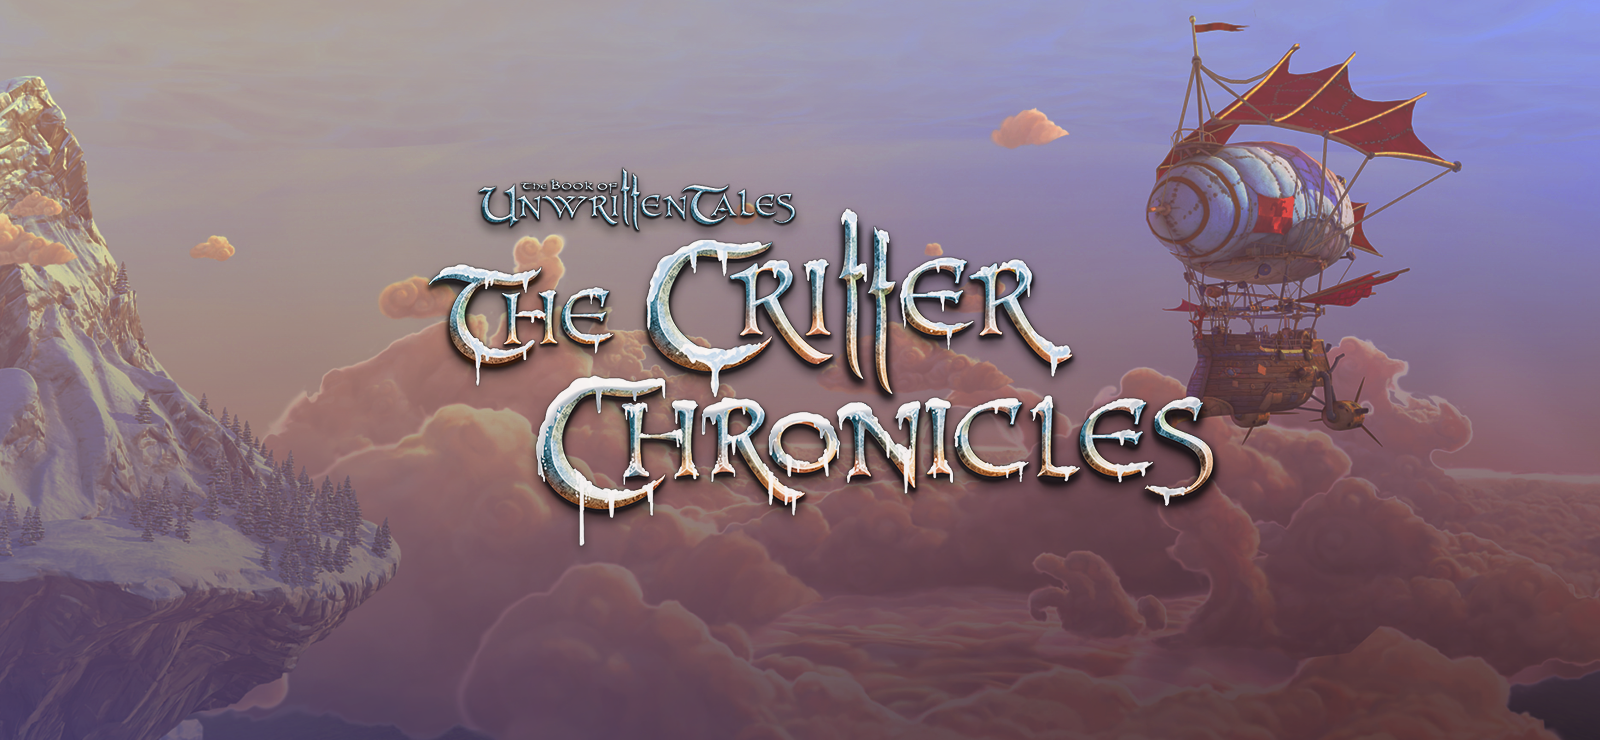 The Book Of Unwritten Tales: The Critter Chronicles